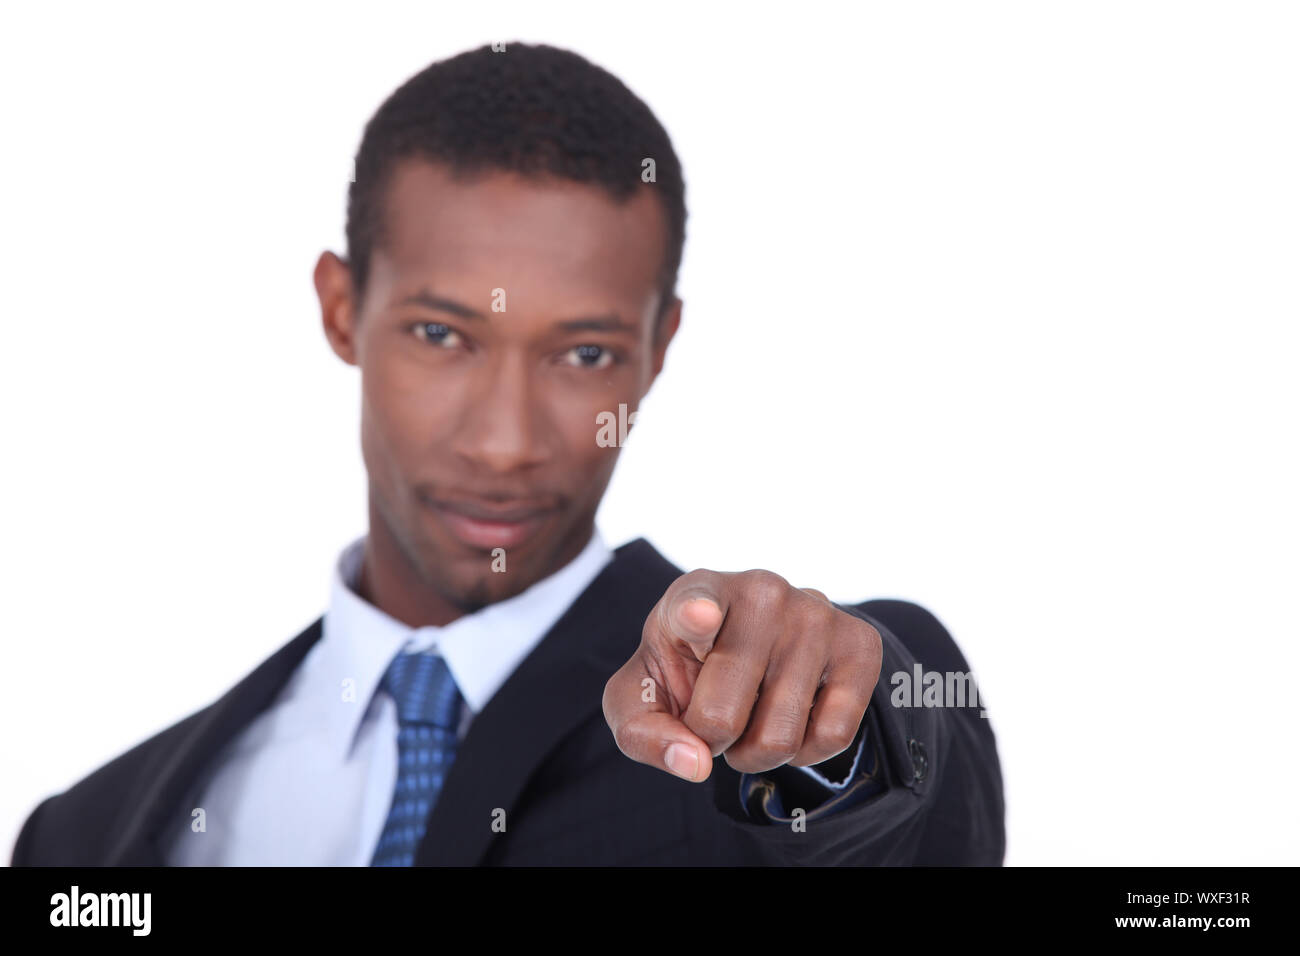 well dressed black man pointing his finger on us Stock Photo